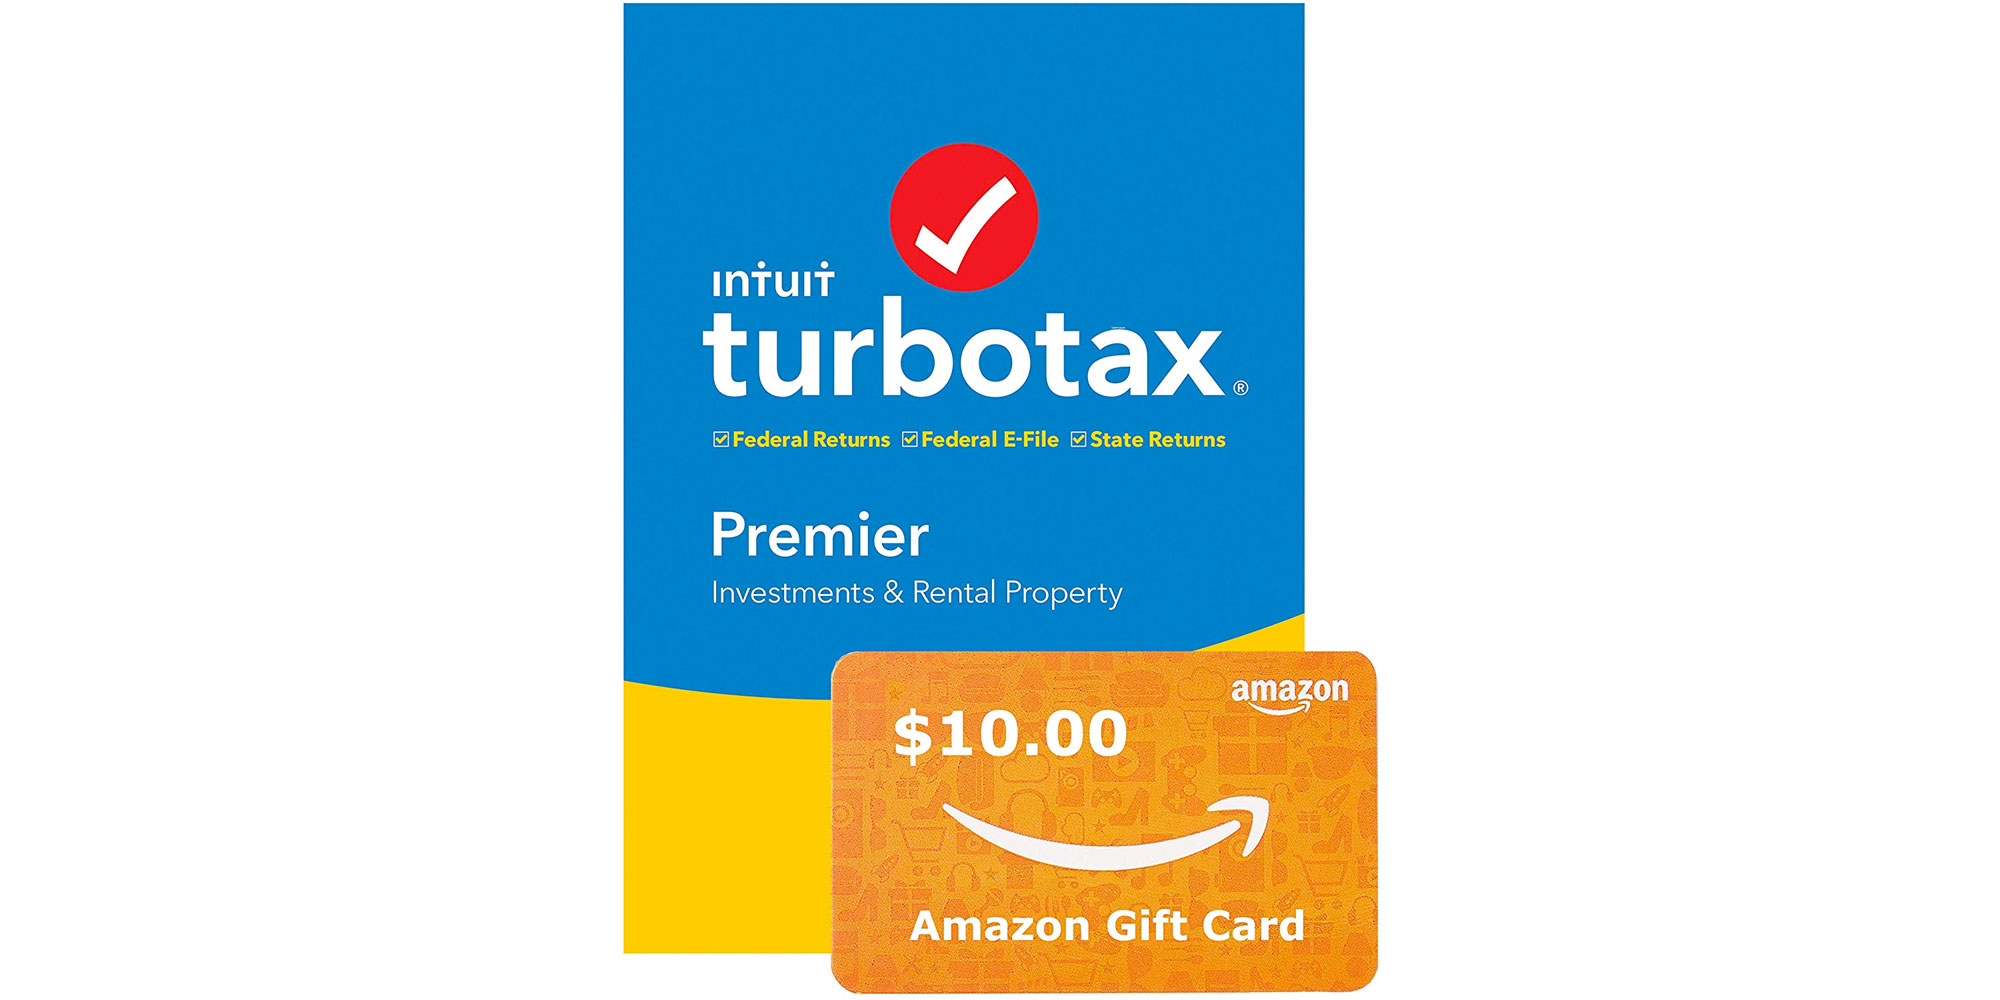 Turbotax Premier Comes Bundled With A 10 Amazon Gift Card For 70 9to5toys